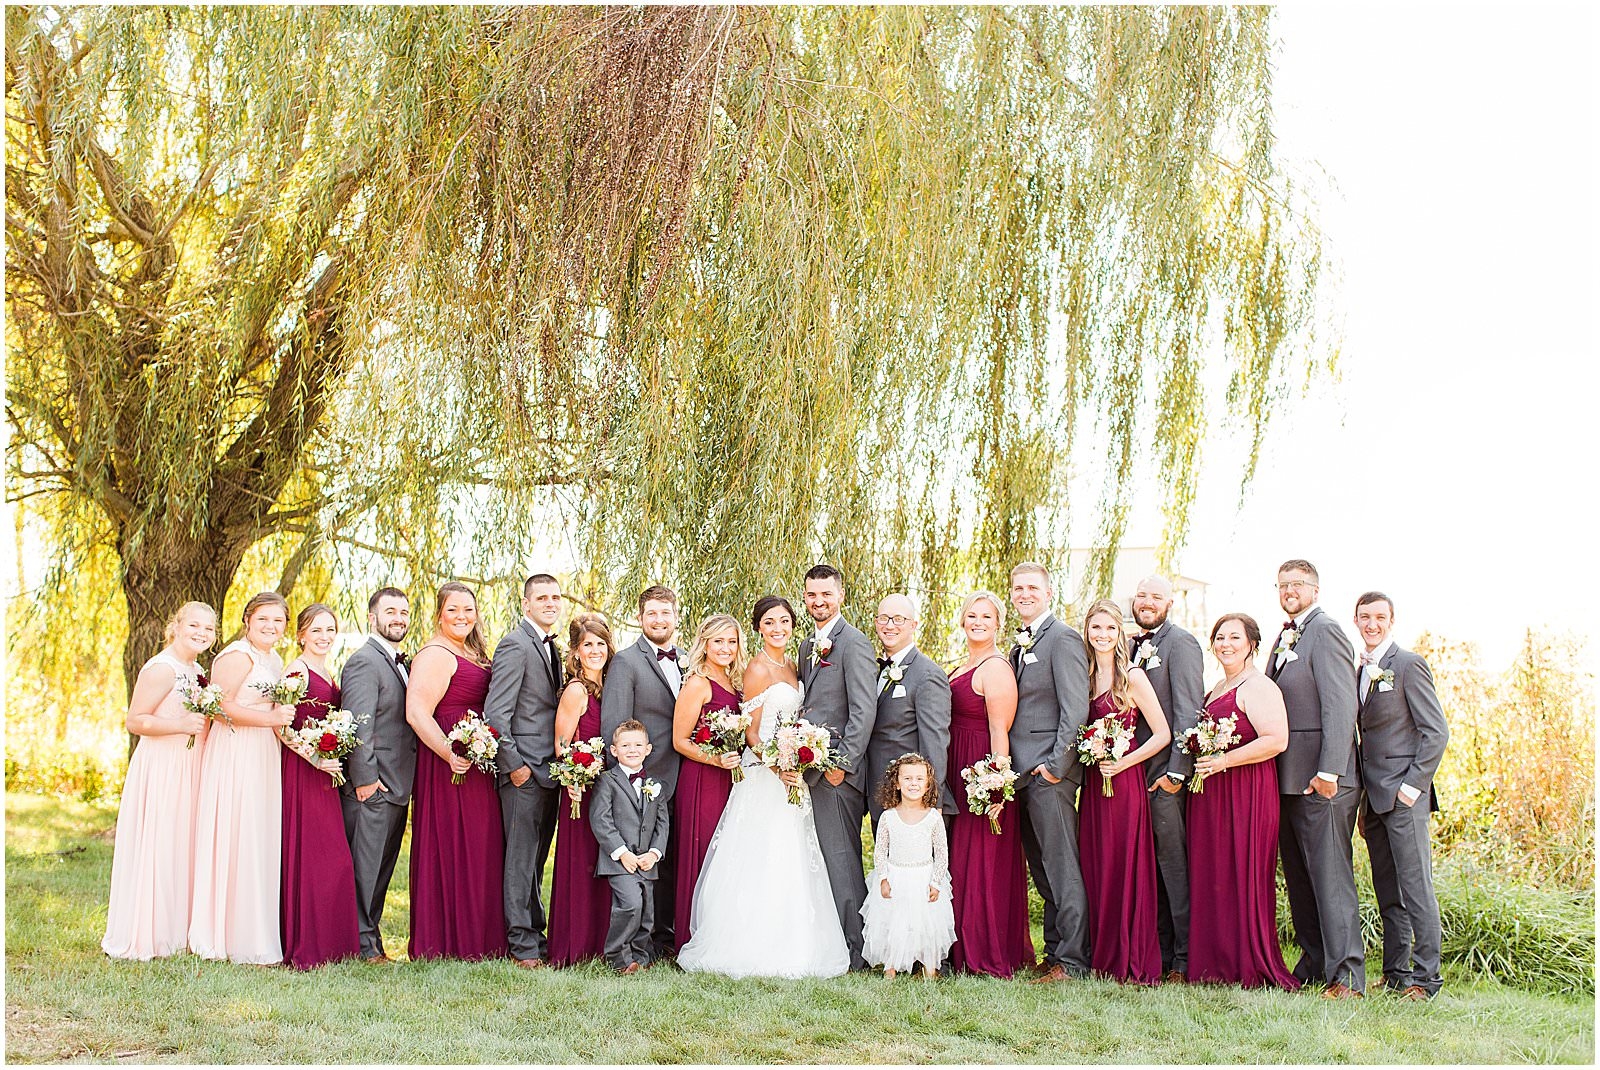 A Stunning Fall Wedding in Indianapolis, IN |. Sally and Andrew | Bret and Brandie Photography 0096.jpg